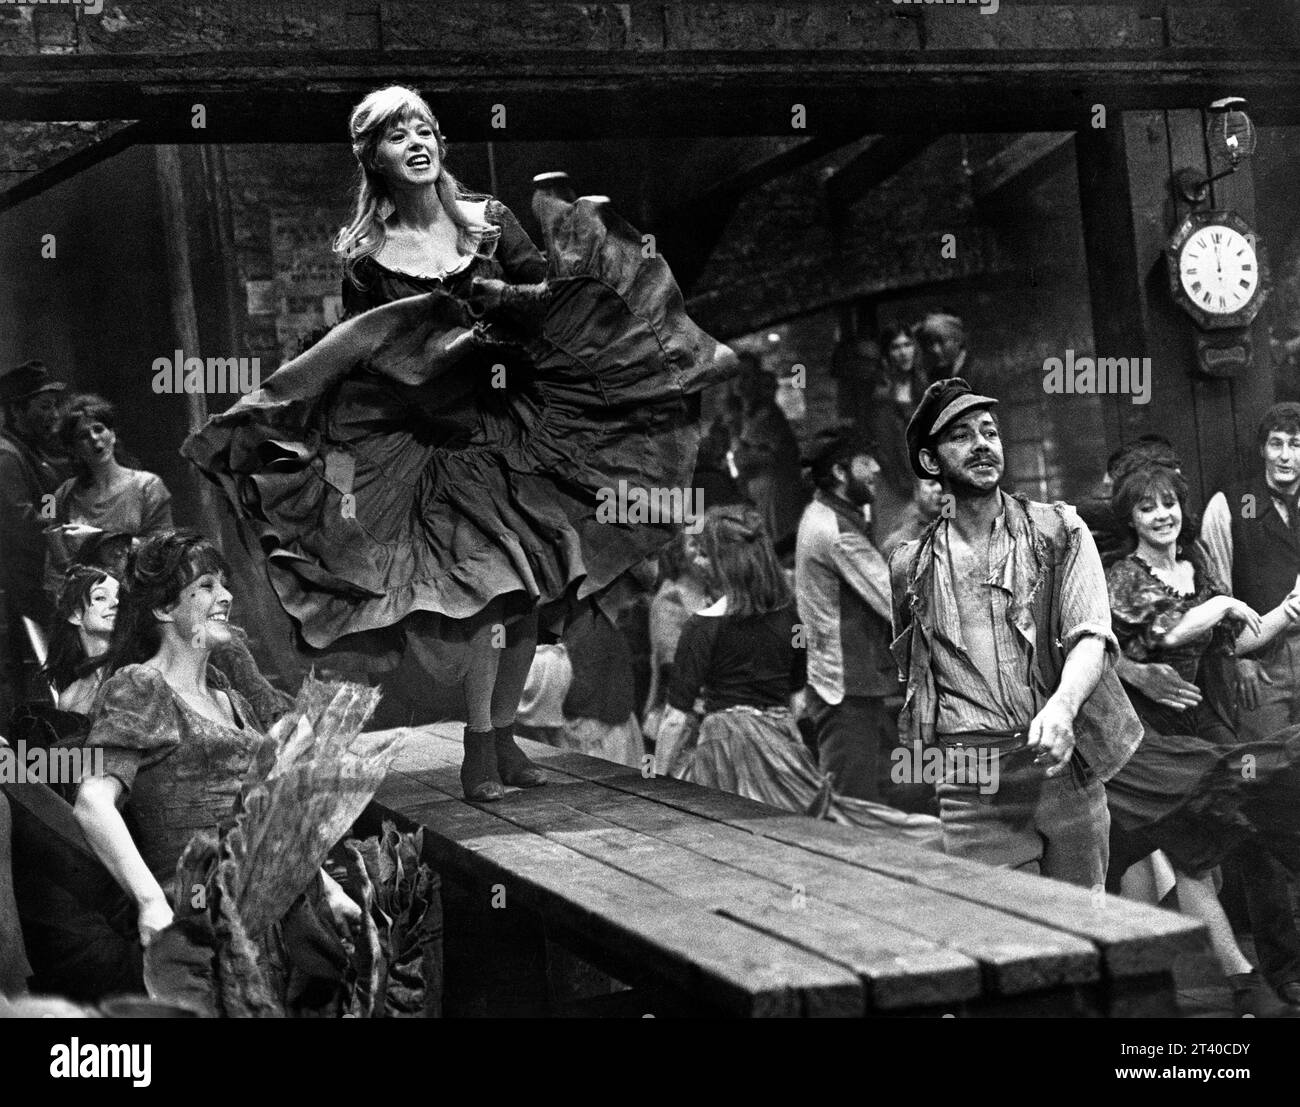 Shani Wallis (dancing on table), on-set of the British musical film, 'Oliver!', Columbia Pictures, 1968 Stock Photo